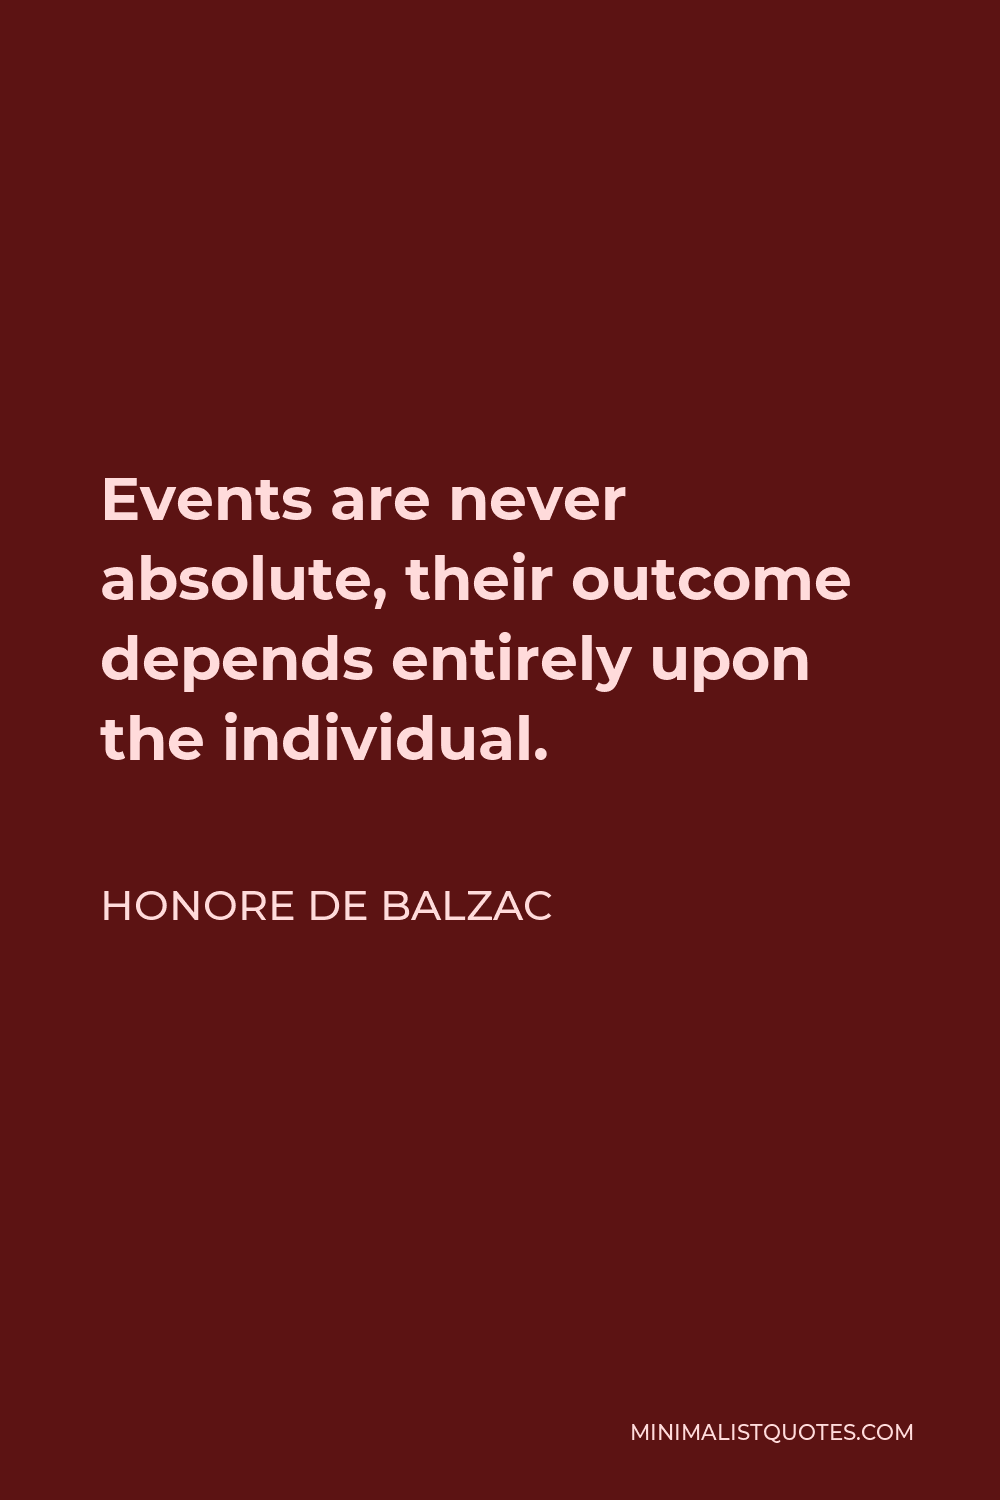 Honore de Balzac Quote - Events are never absolute, their outcome depends entirely upon the individual.